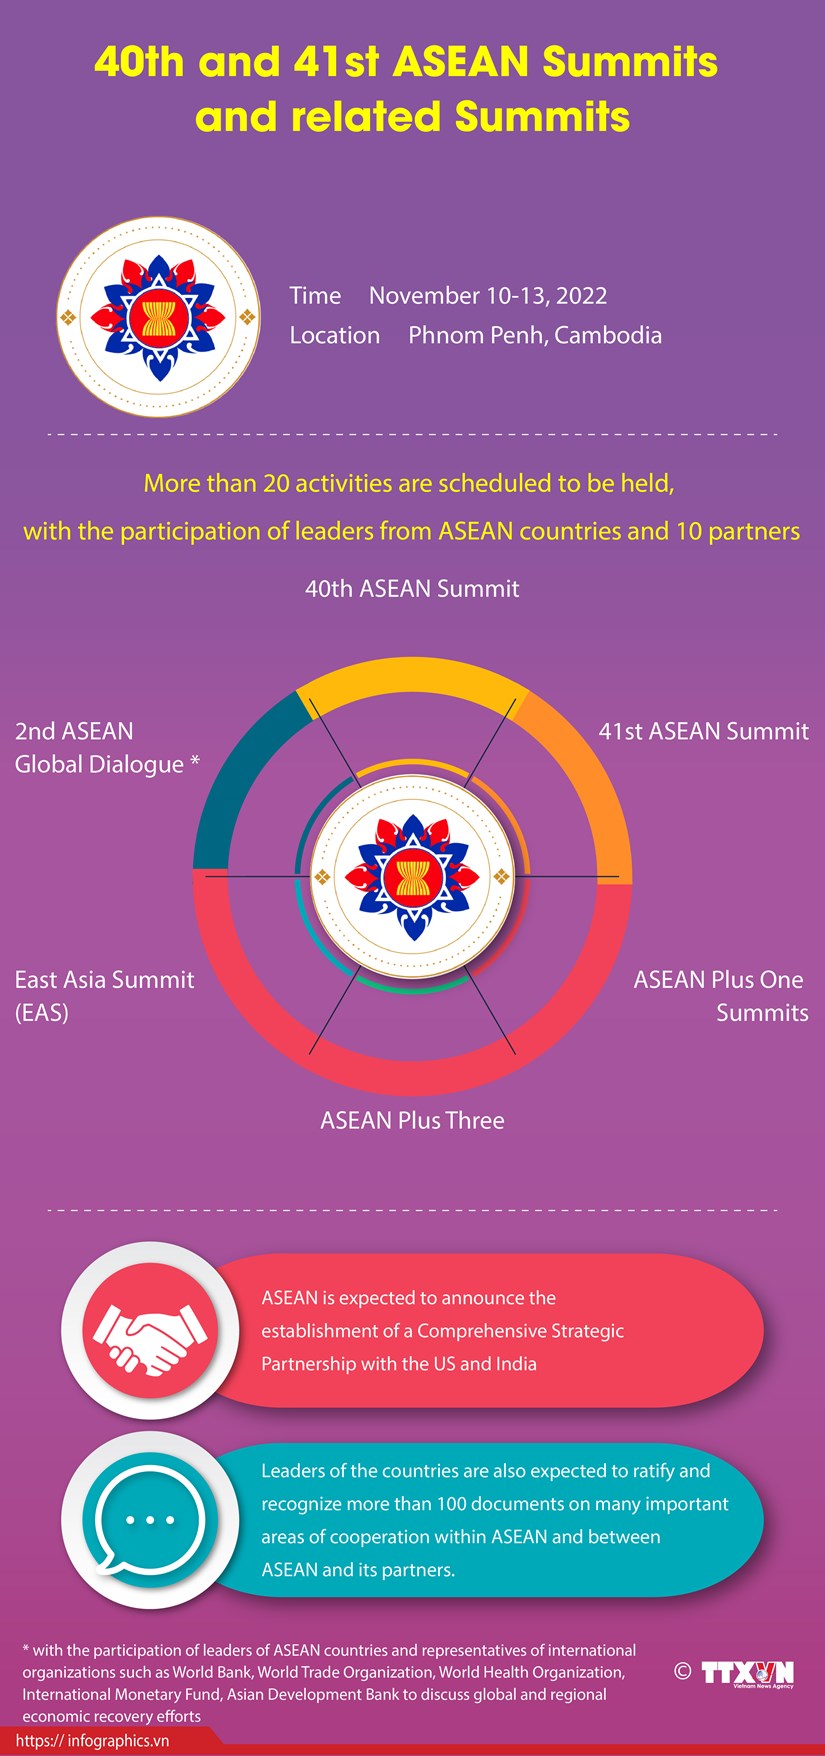 40th and 41st ASEAN Summits and related Summits hinh anh 1